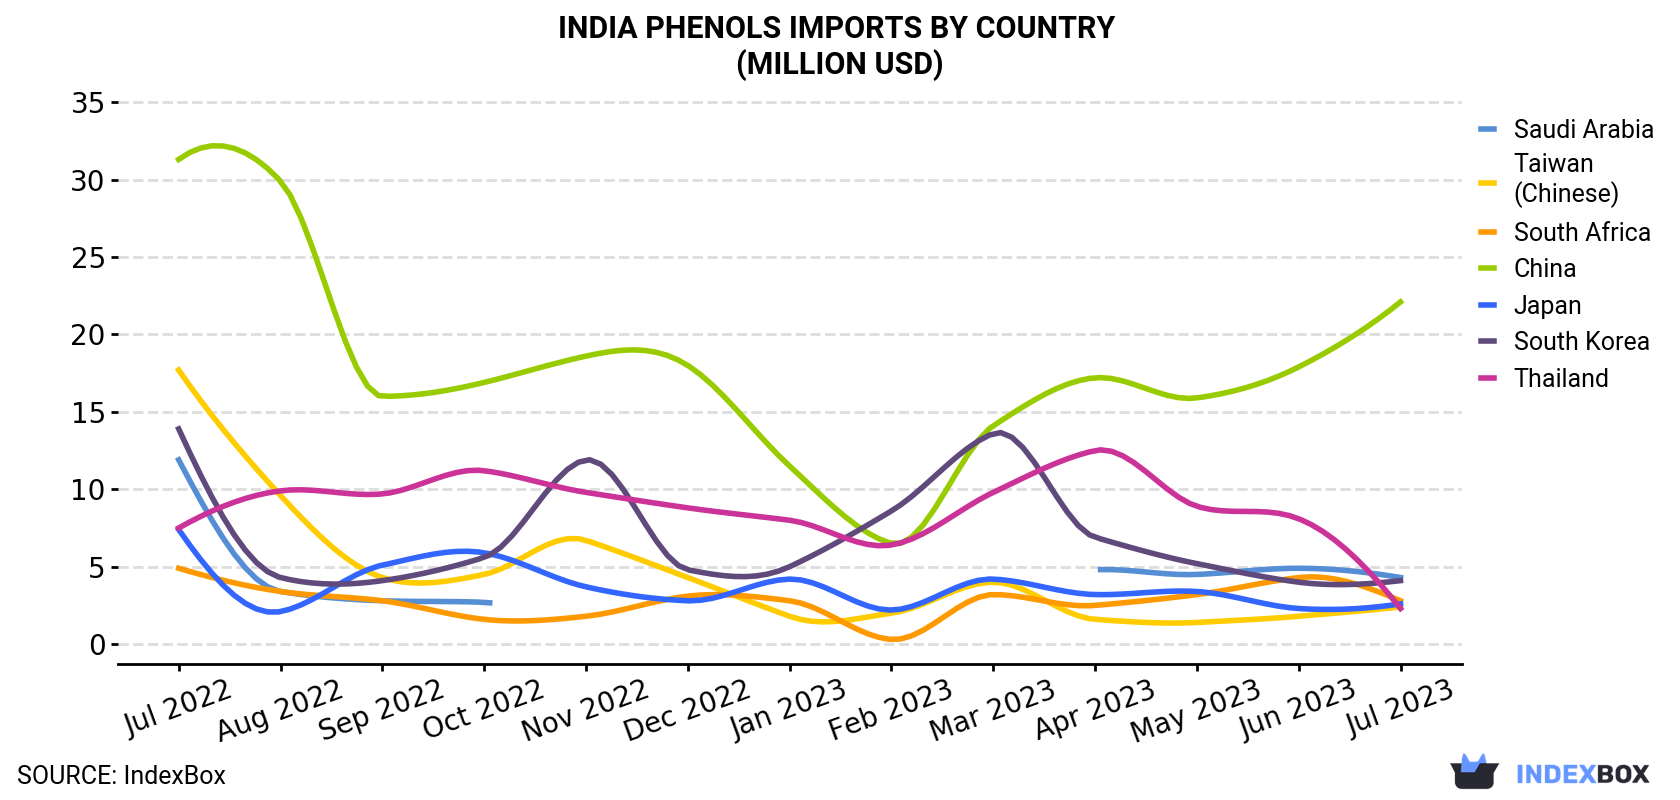 India Phenols Imports By Country (Million USD)